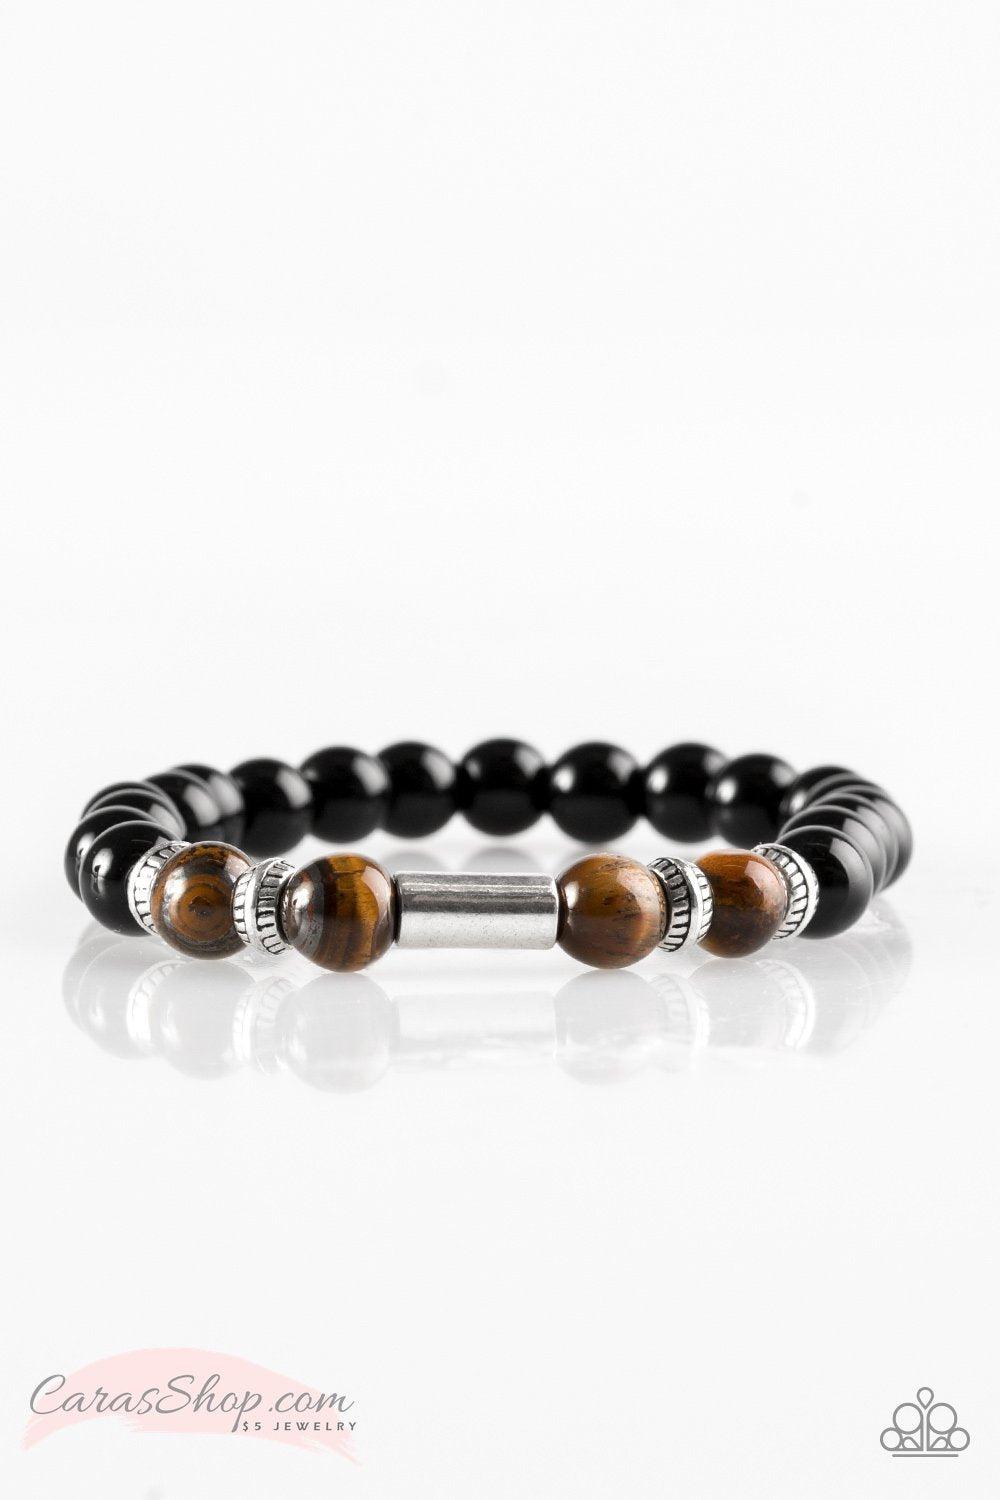 Entranced Brown Tiger Eye and Black Stone Stretch Bracelet - Paparazzi Accessories-CarasShop.com - $5 Jewelry by Cara Jewels